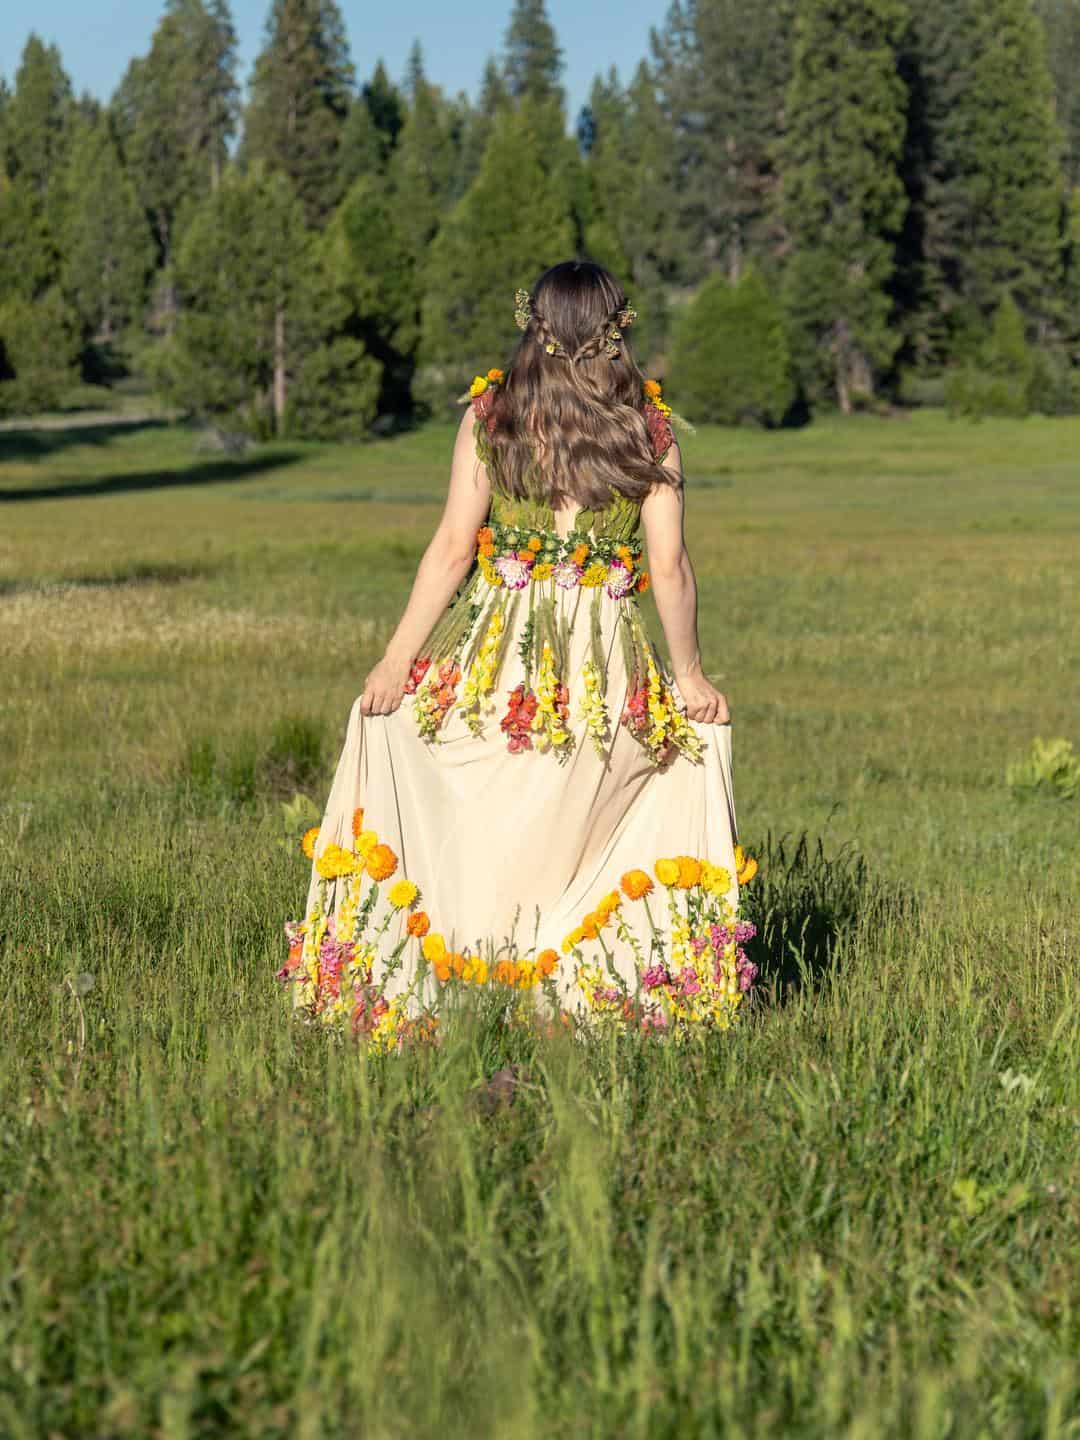 Jenny's dress demonstrates the flower power - how flowers can inspire and educate